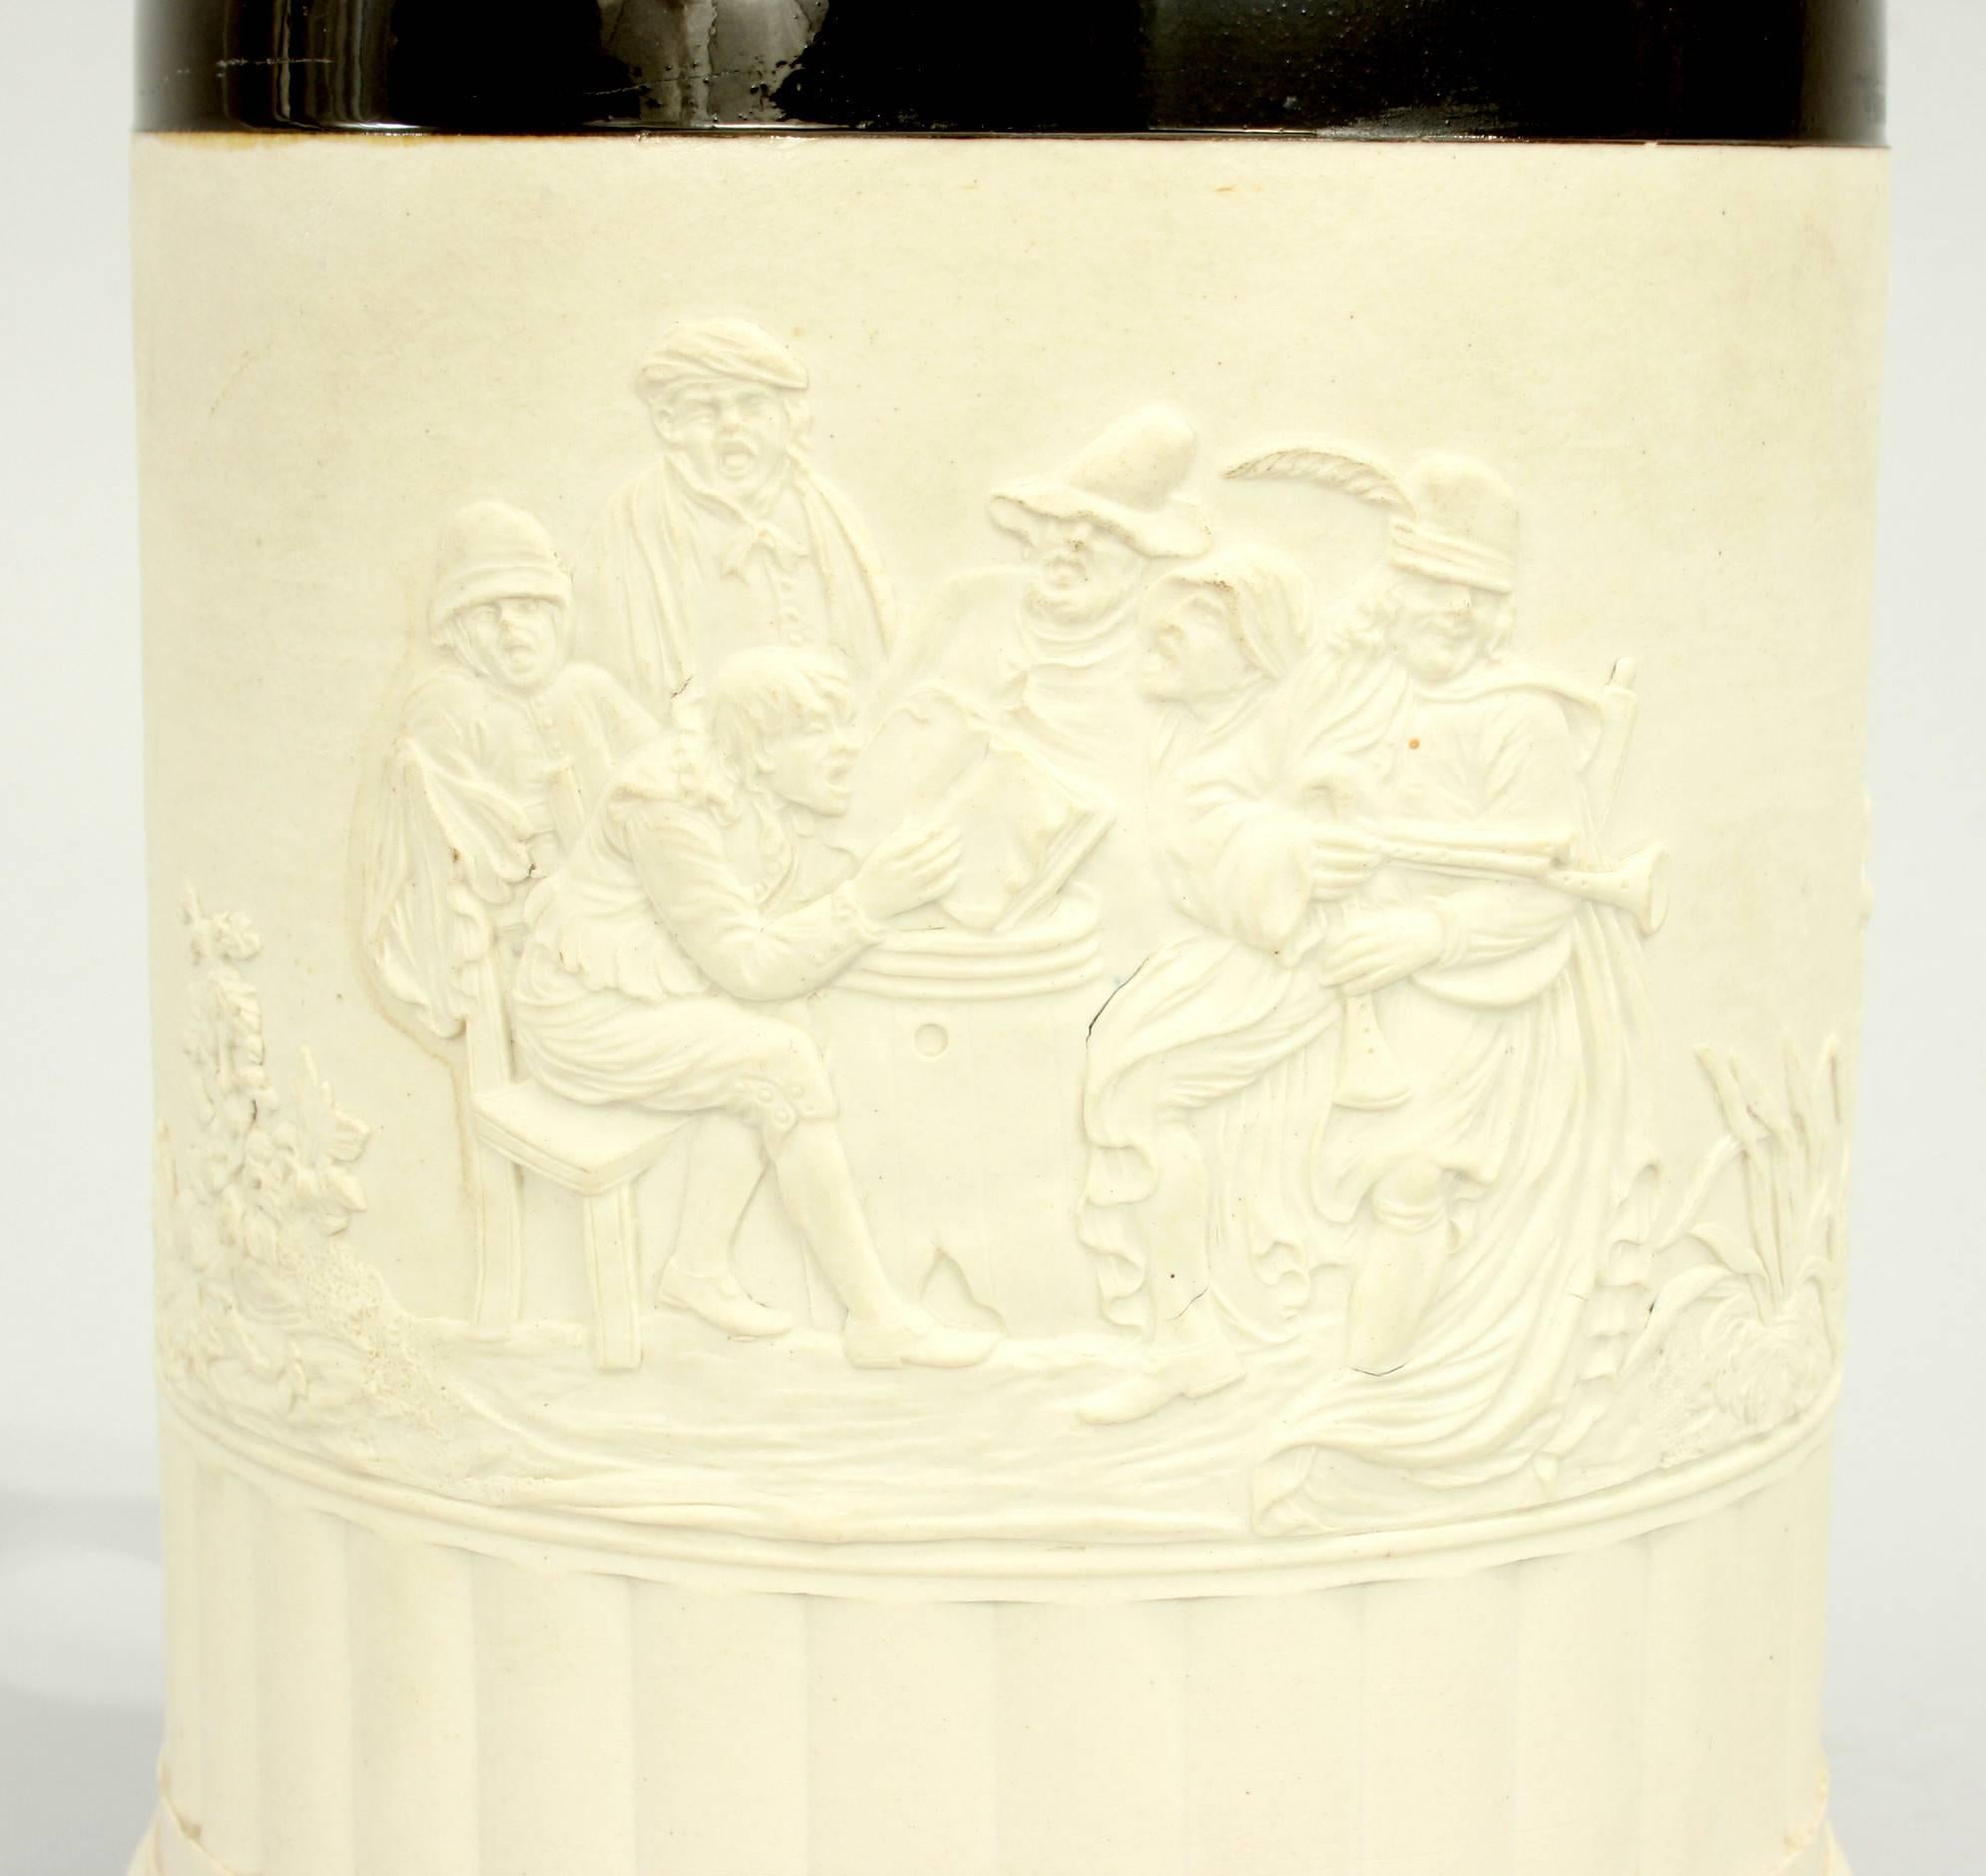 Large Adams white stoneware tankard / mug.
A large white stoneware tankard by Adams. The mug has a large handle and a plated metal rim made by Thomas Law & Co. The scene is in relief and depicts a group of merry men having a sing song seated around